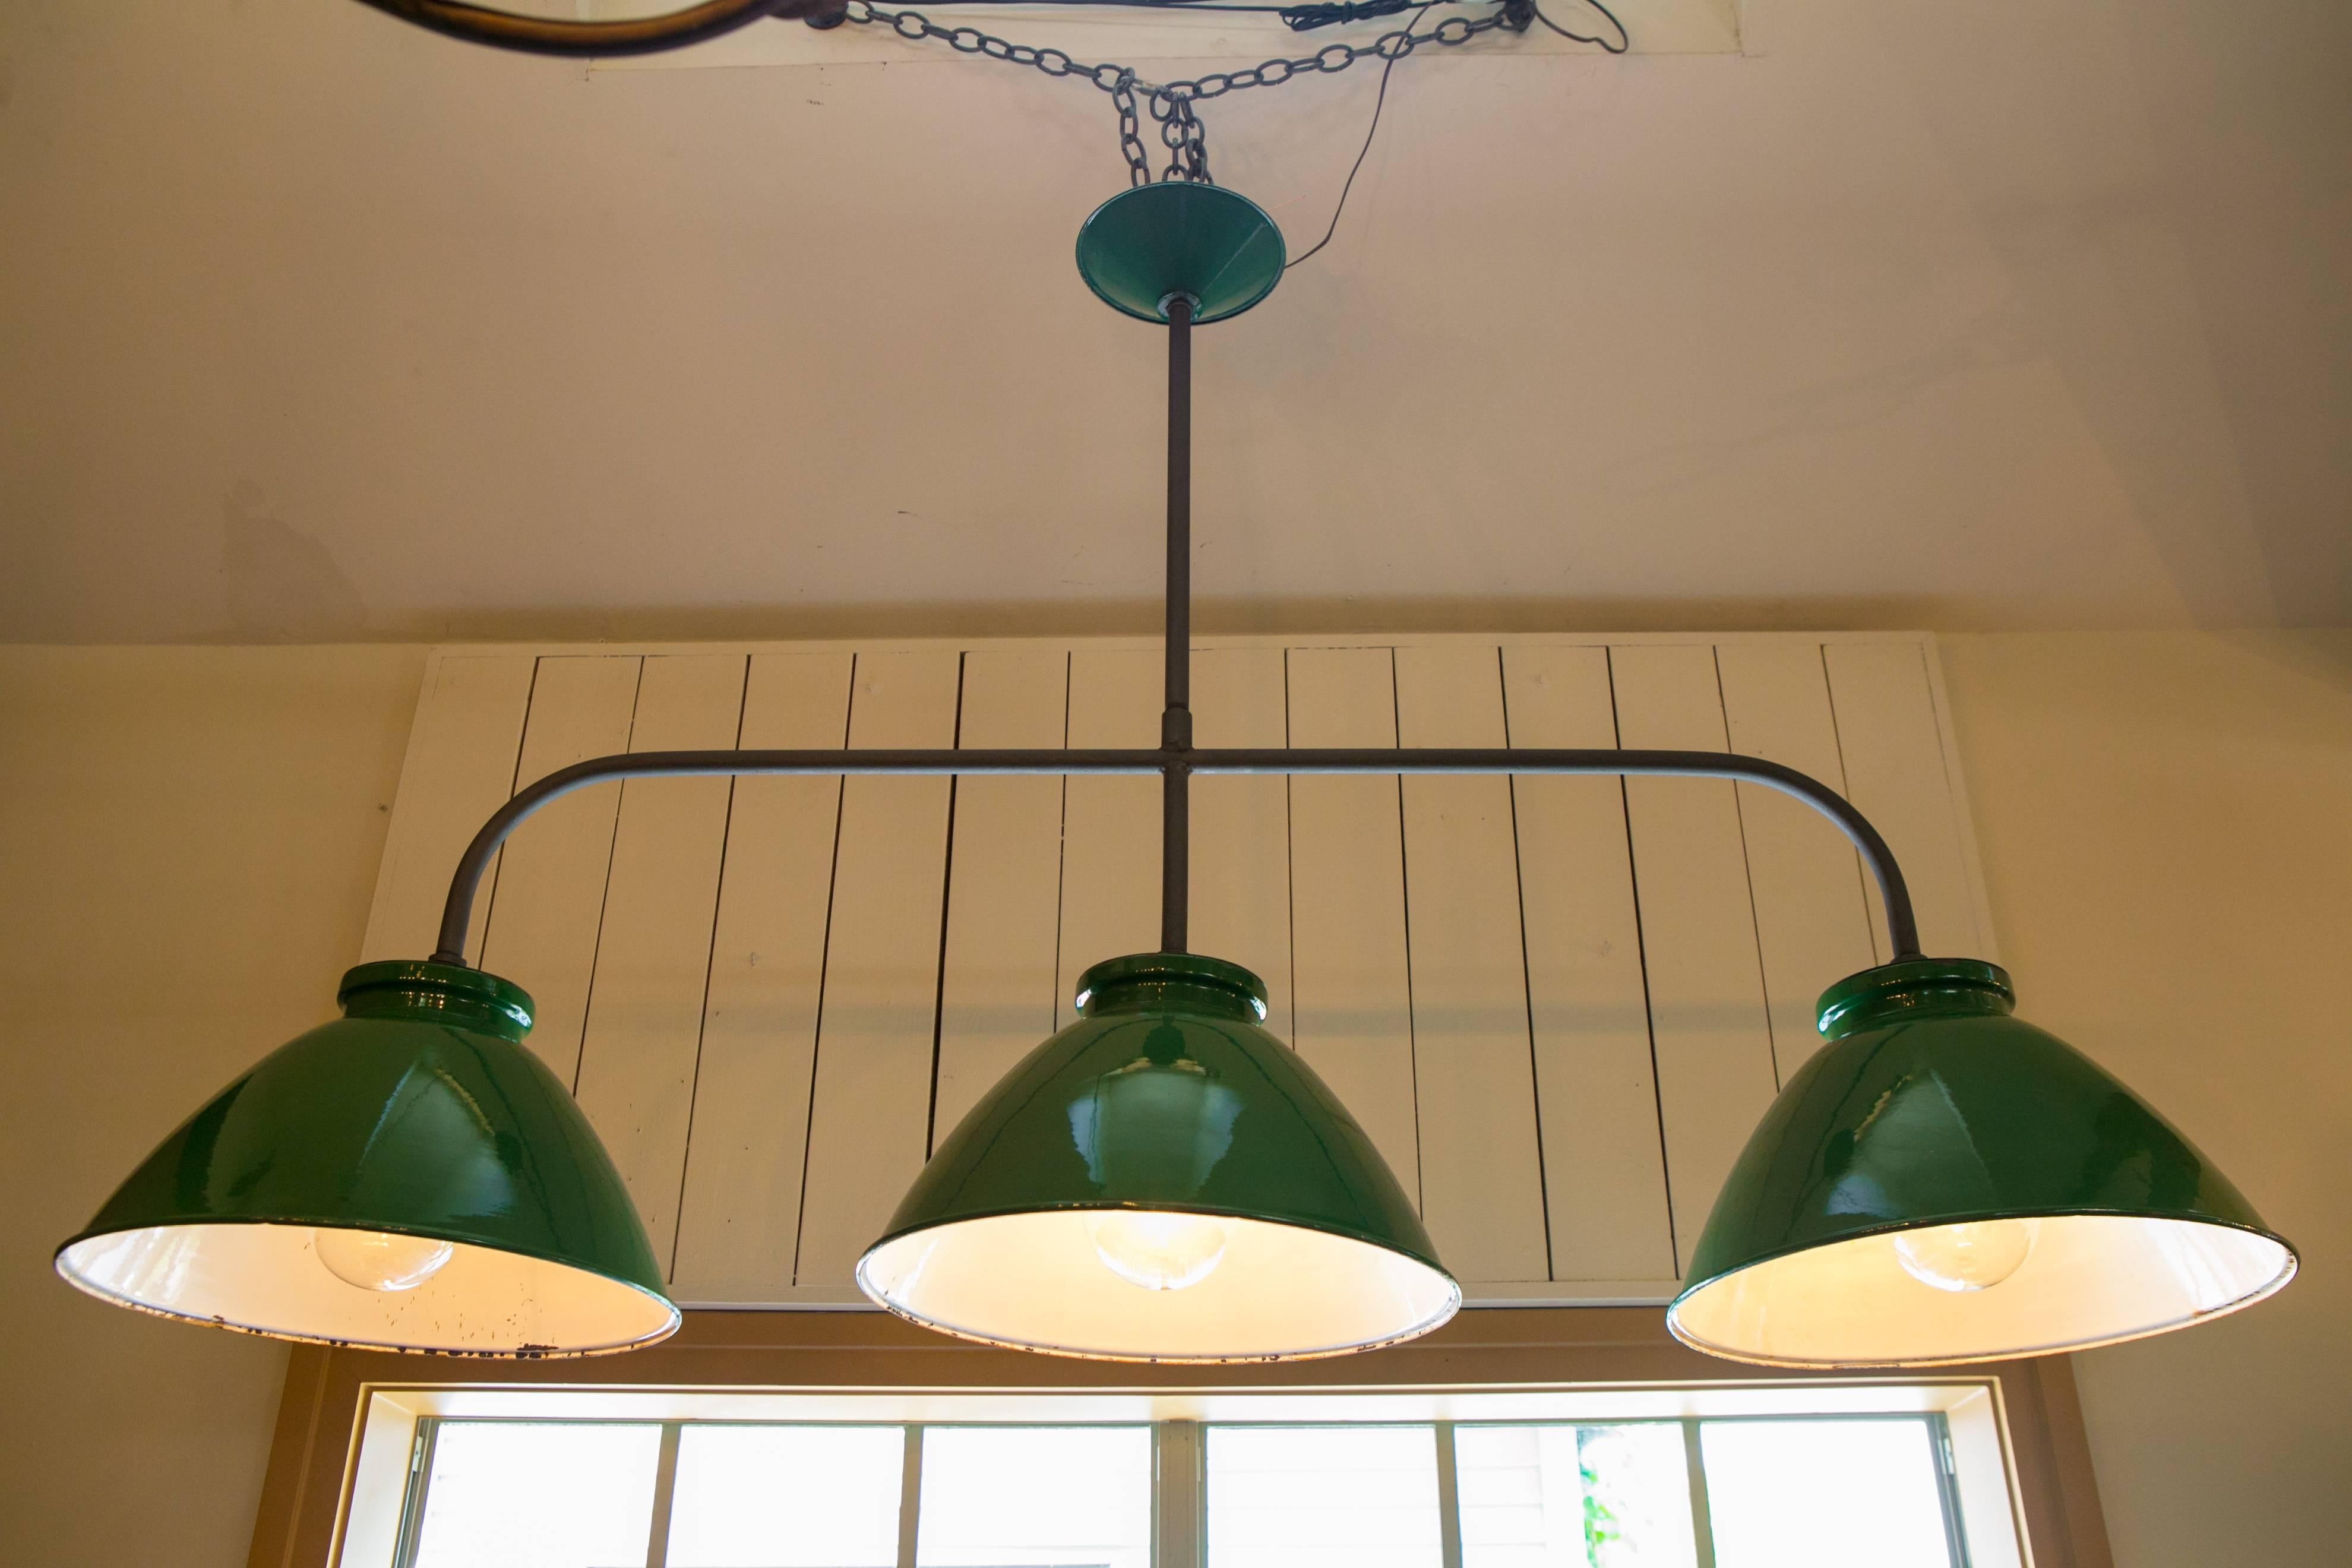 Our exclusive design, this three shaded light is constructed from vintage French green enamel factory lights and an iron body. Custom green vintage enamel canopy cover attached to the rod. Perfect for a pool table or over an island. Shades are from